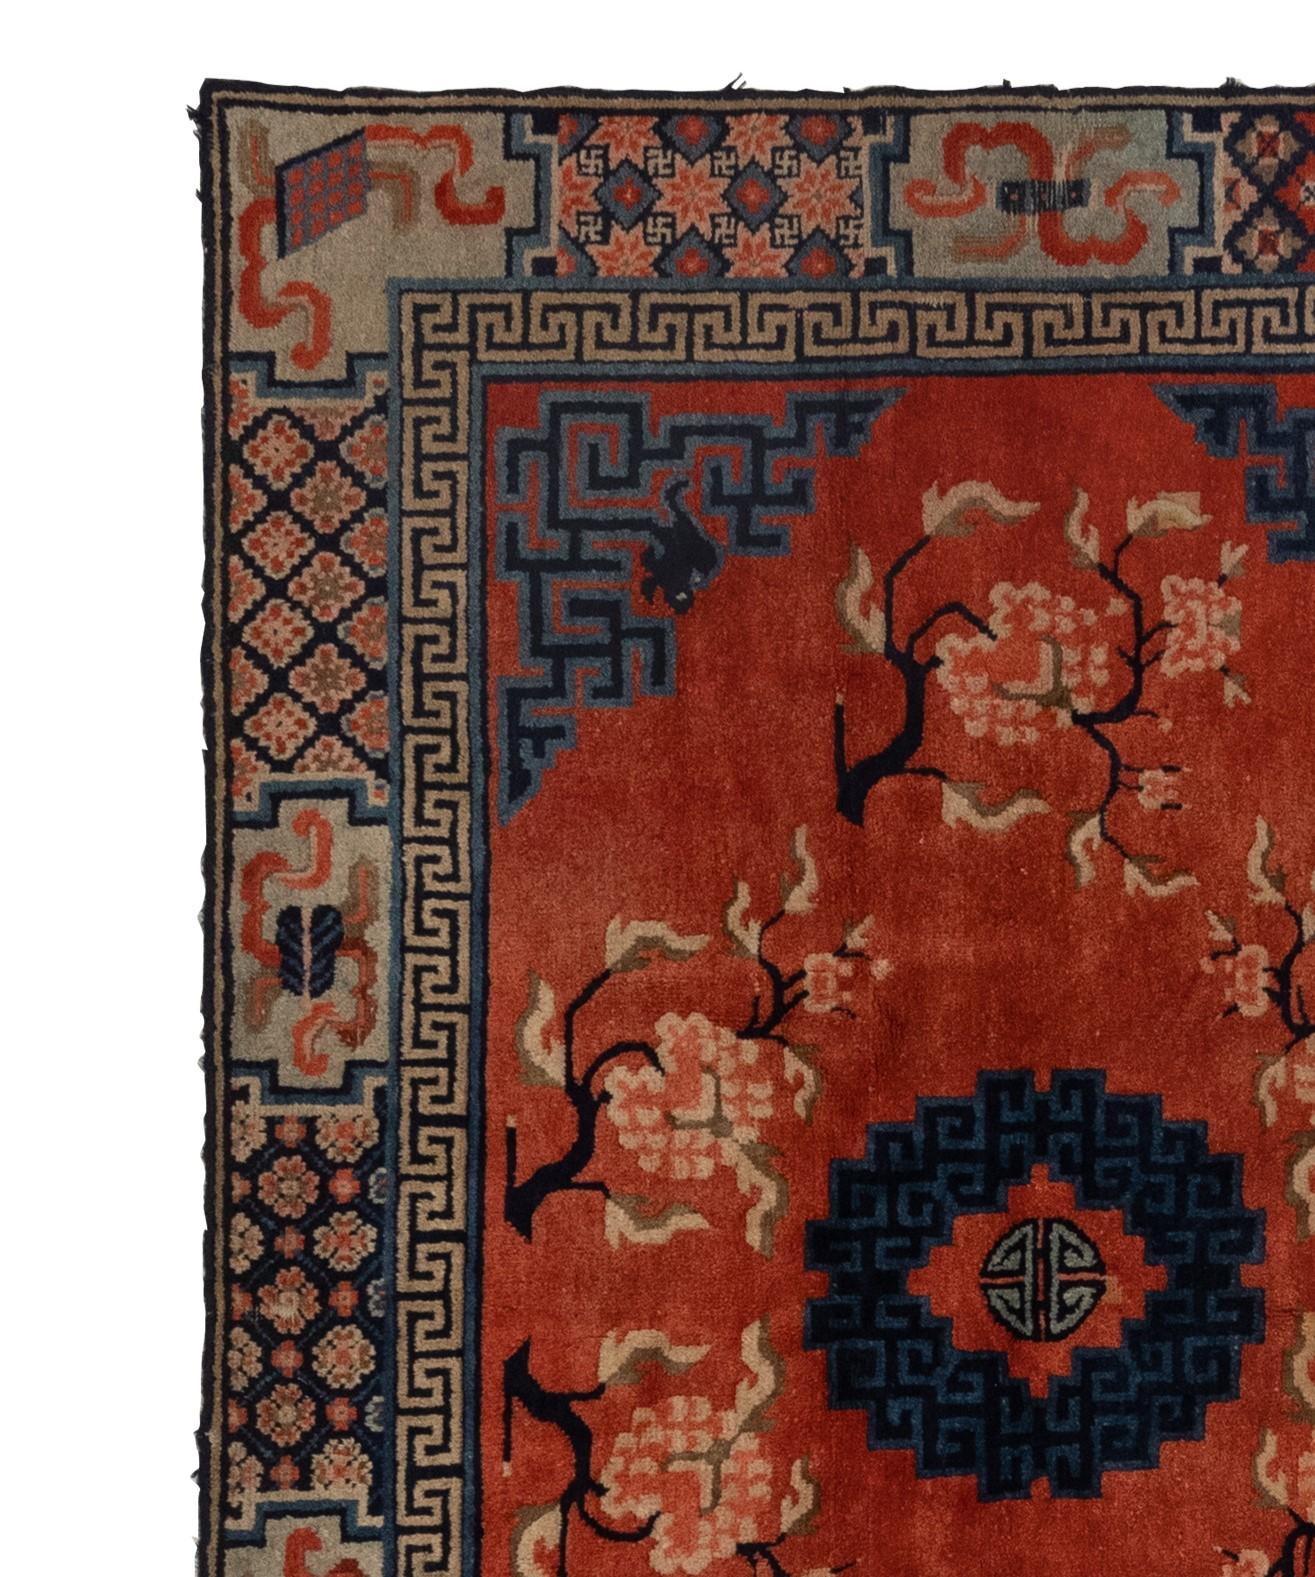 This is a breathtaking antique Tibetan rug dating back to the 1900s. The rug is in pristine condition and its intricate design features a stunning medallion at the center, making it a truly extraordinary item. This remarkable work of art is